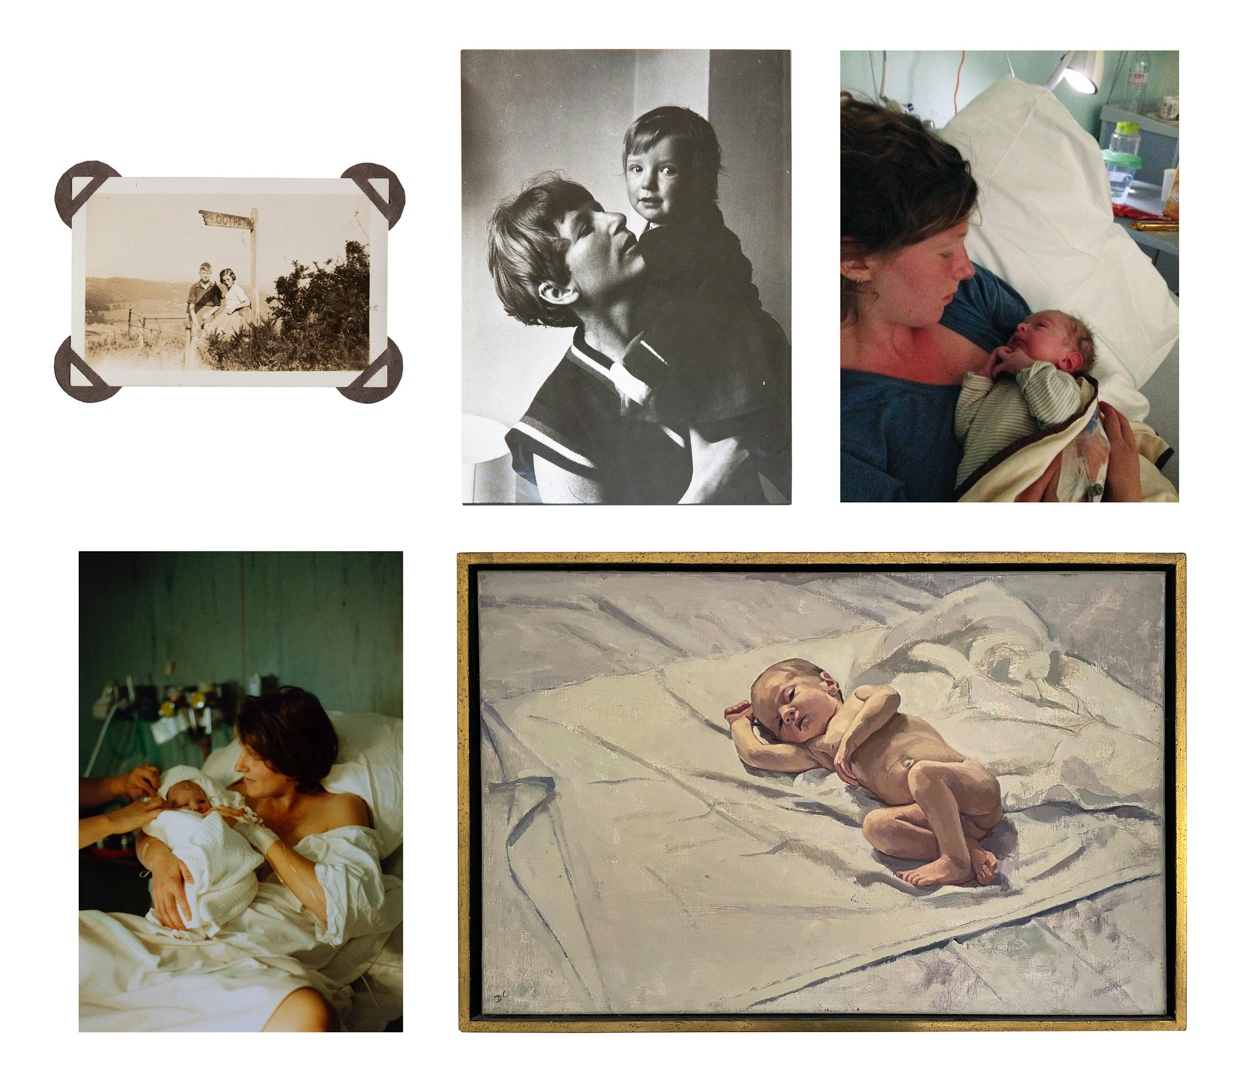 A group of 5 family archive photos and an oil painting ranging in date from 1941 to 2015. The photos show young babies in the arms of their parents, some of them showing new born babies in a hospital maternity ward, all different generations, but similarities can be seen across the set. The oil painting shows a young baby asleep on a white sheet.